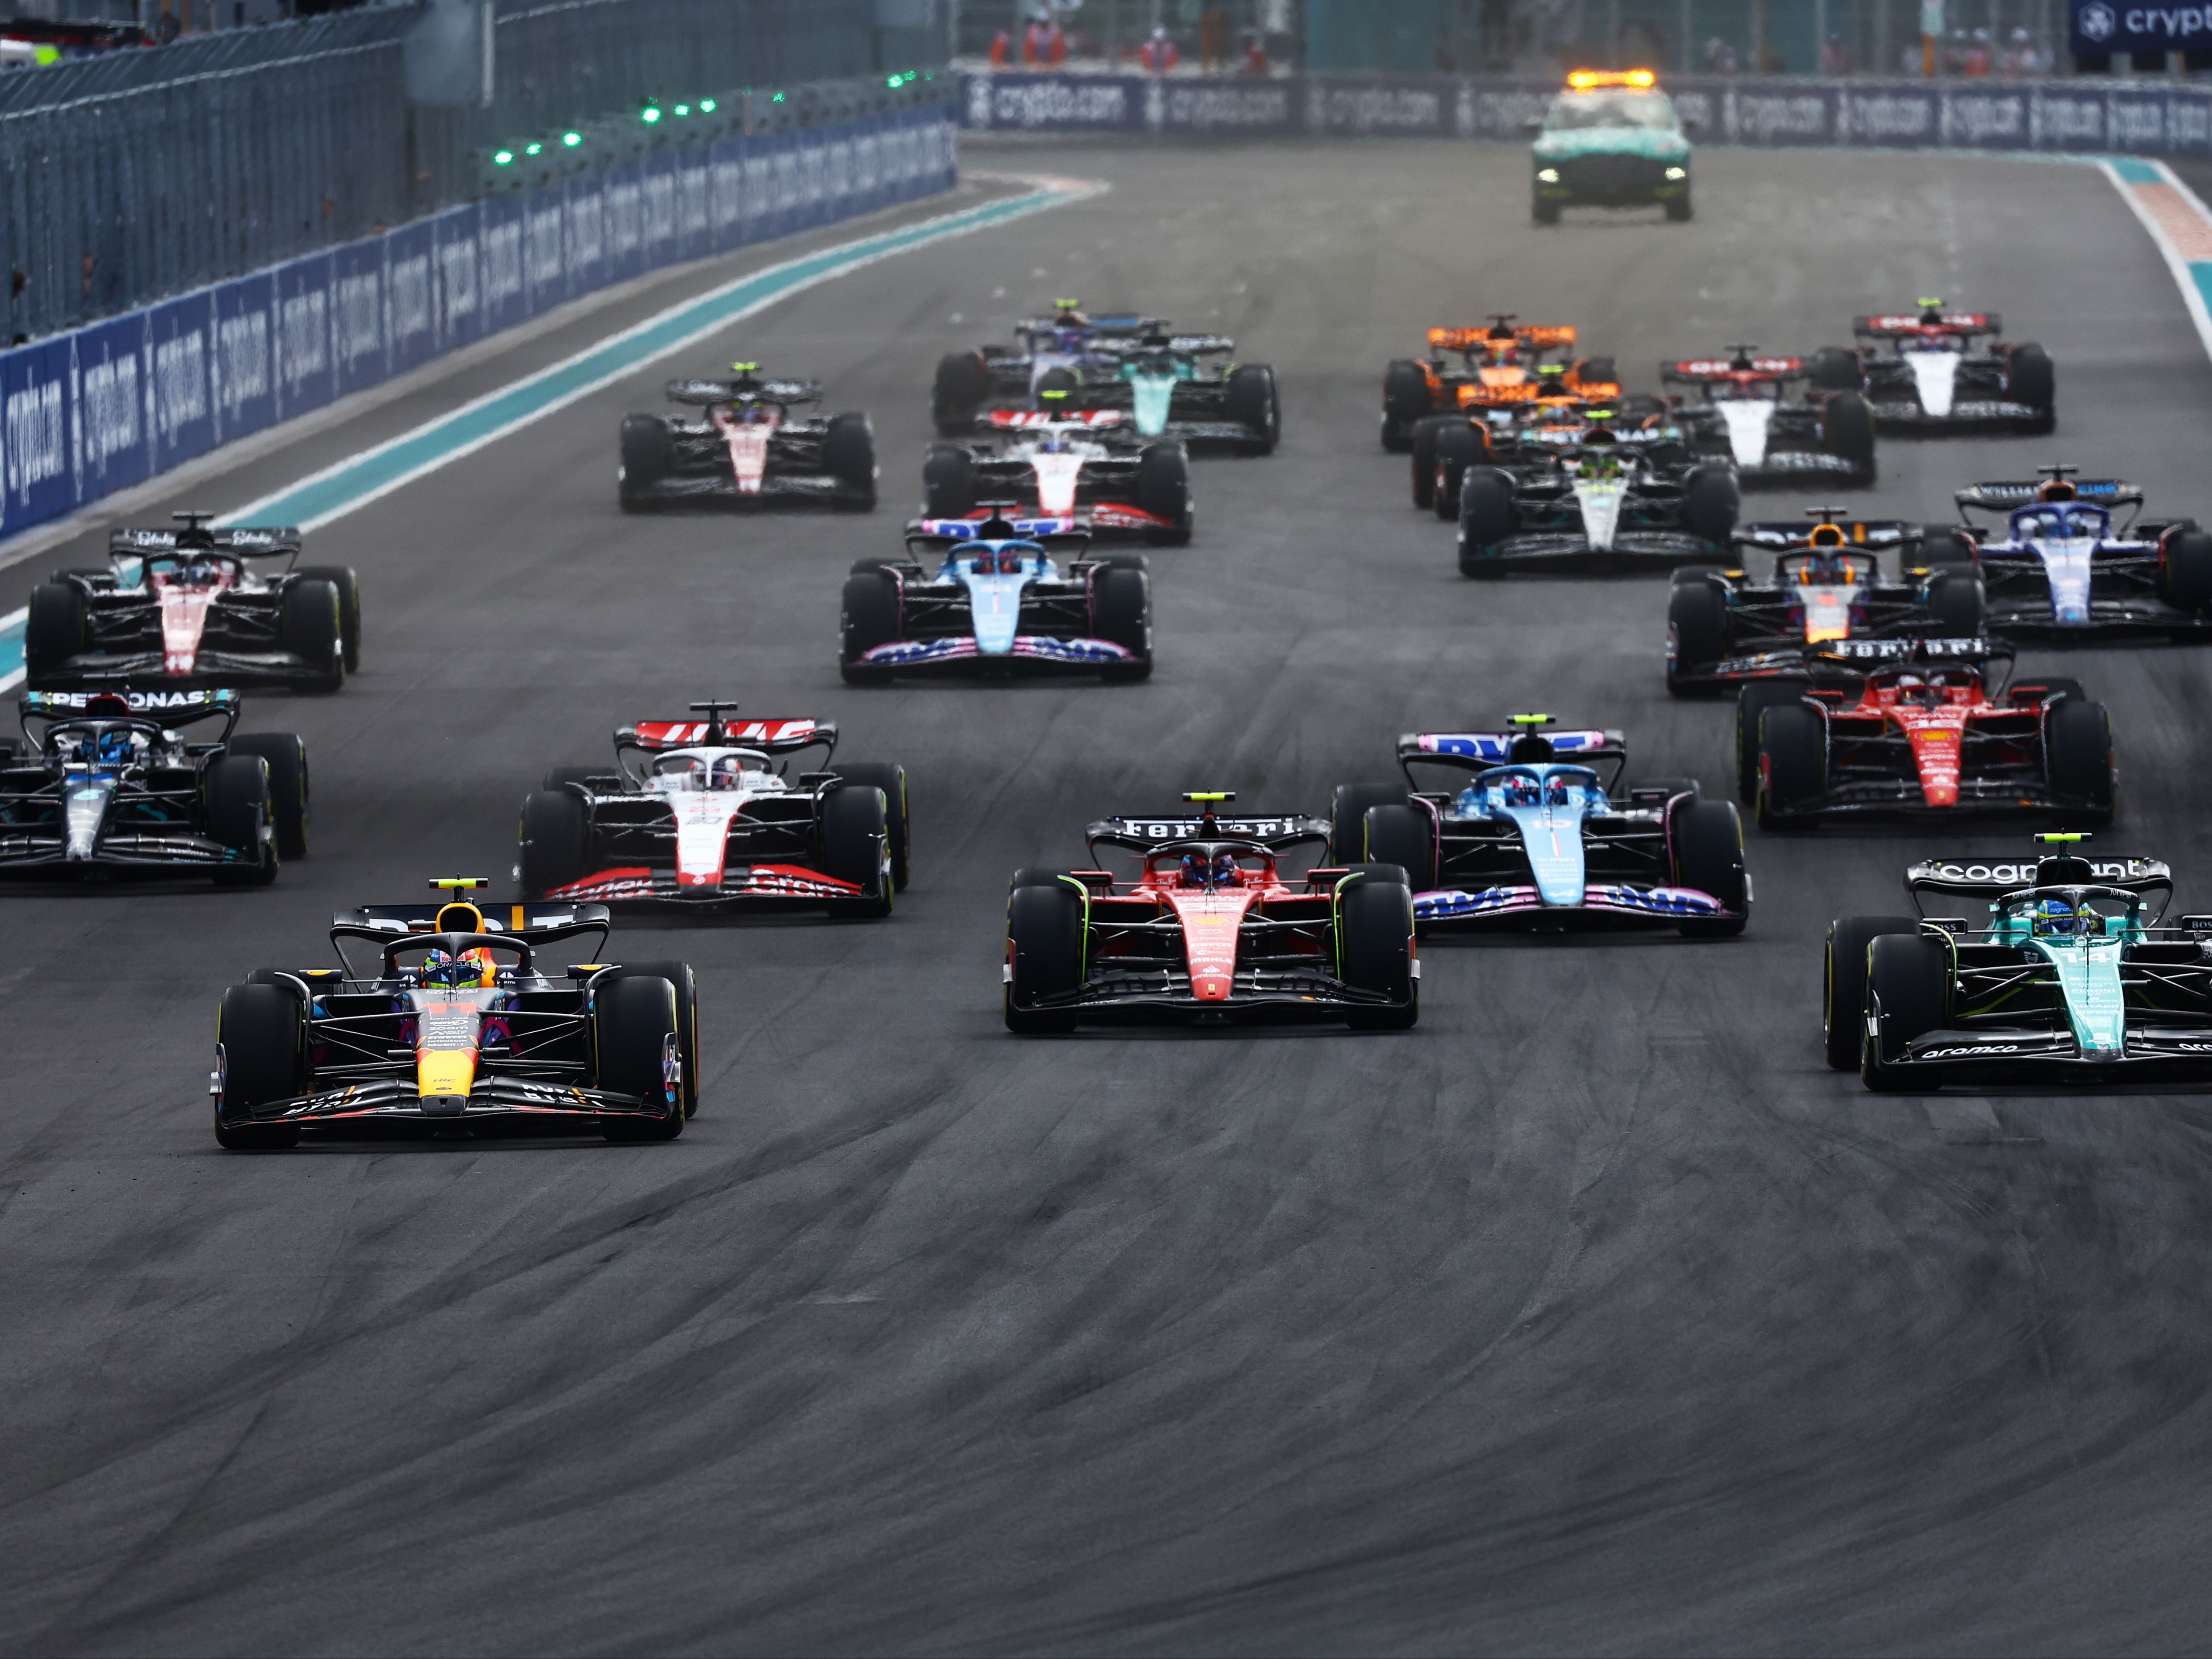 2023 F1 Miami GP Who was voted the driver of the day?